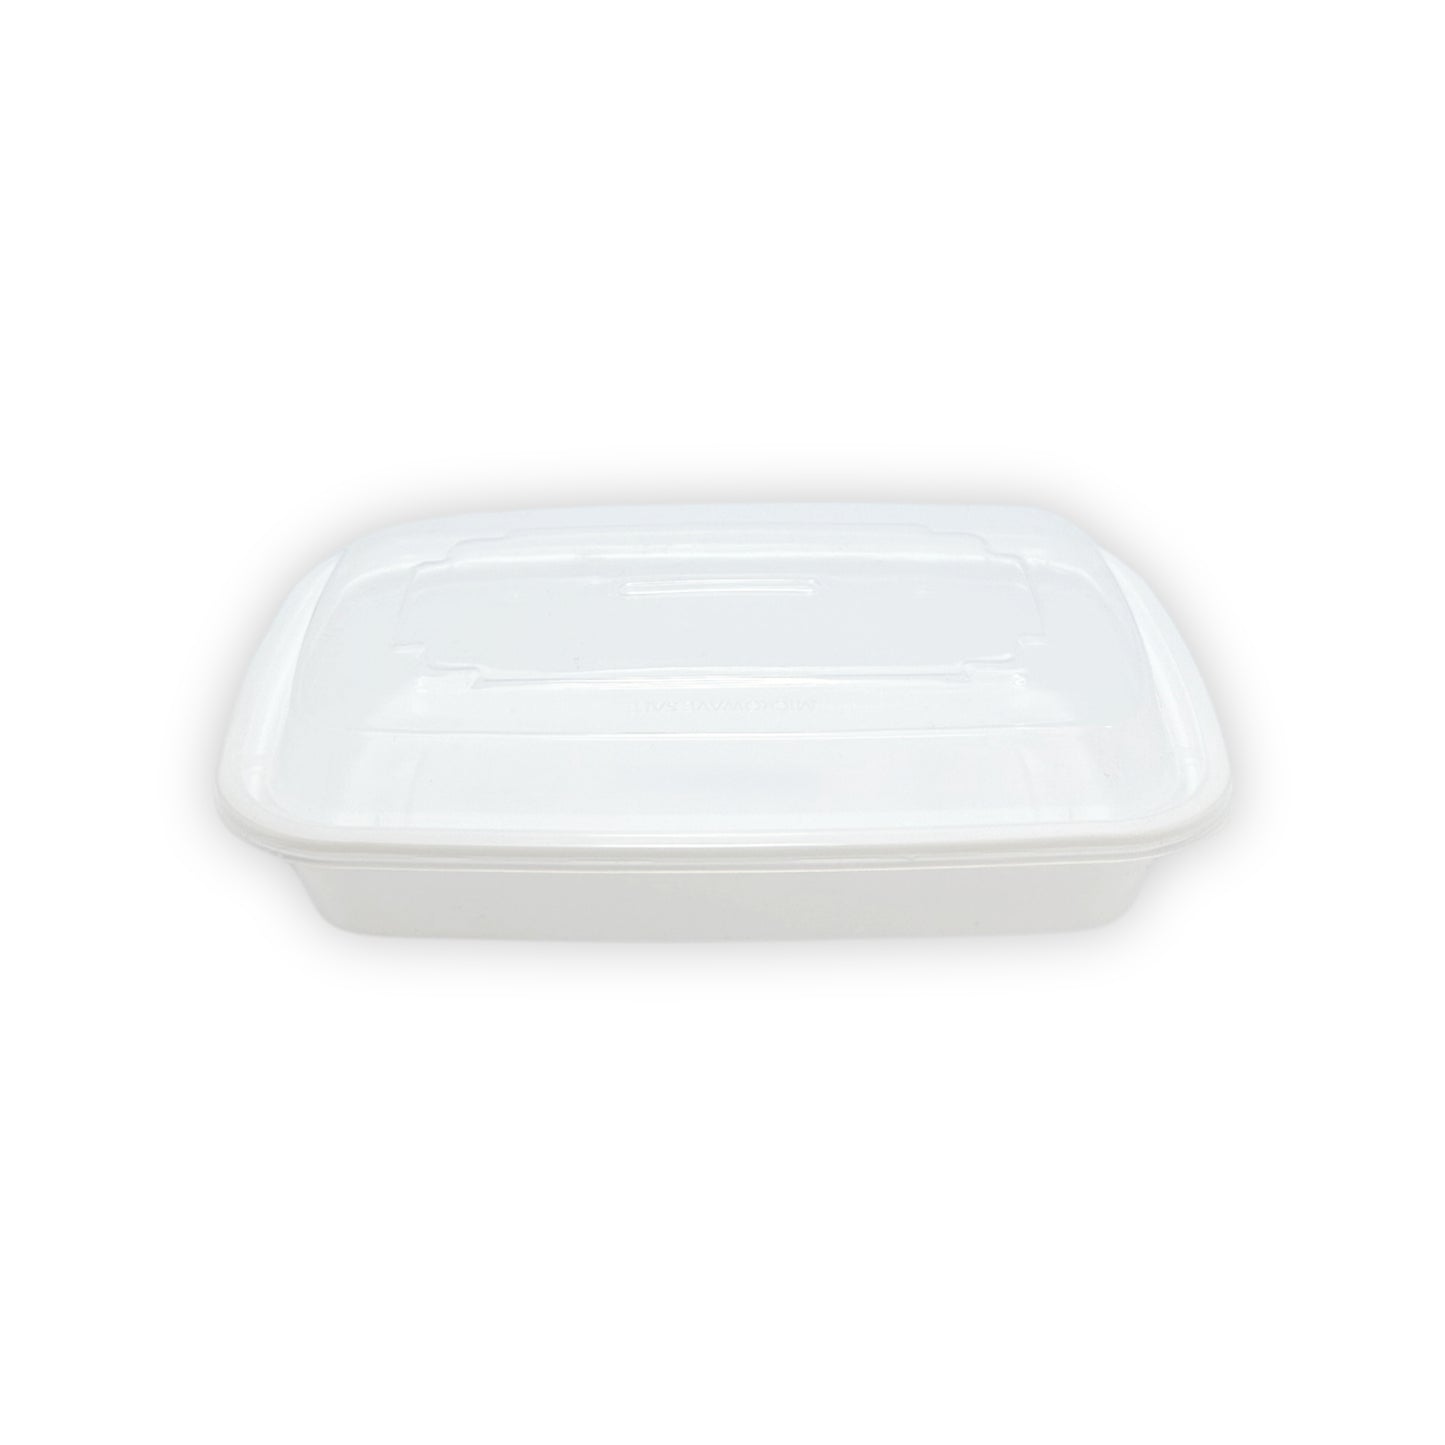 KIS-KY16G | 150sets 16oz, 473ml White PP Rectangle Container with Clear Lids Combo; $0.196/set